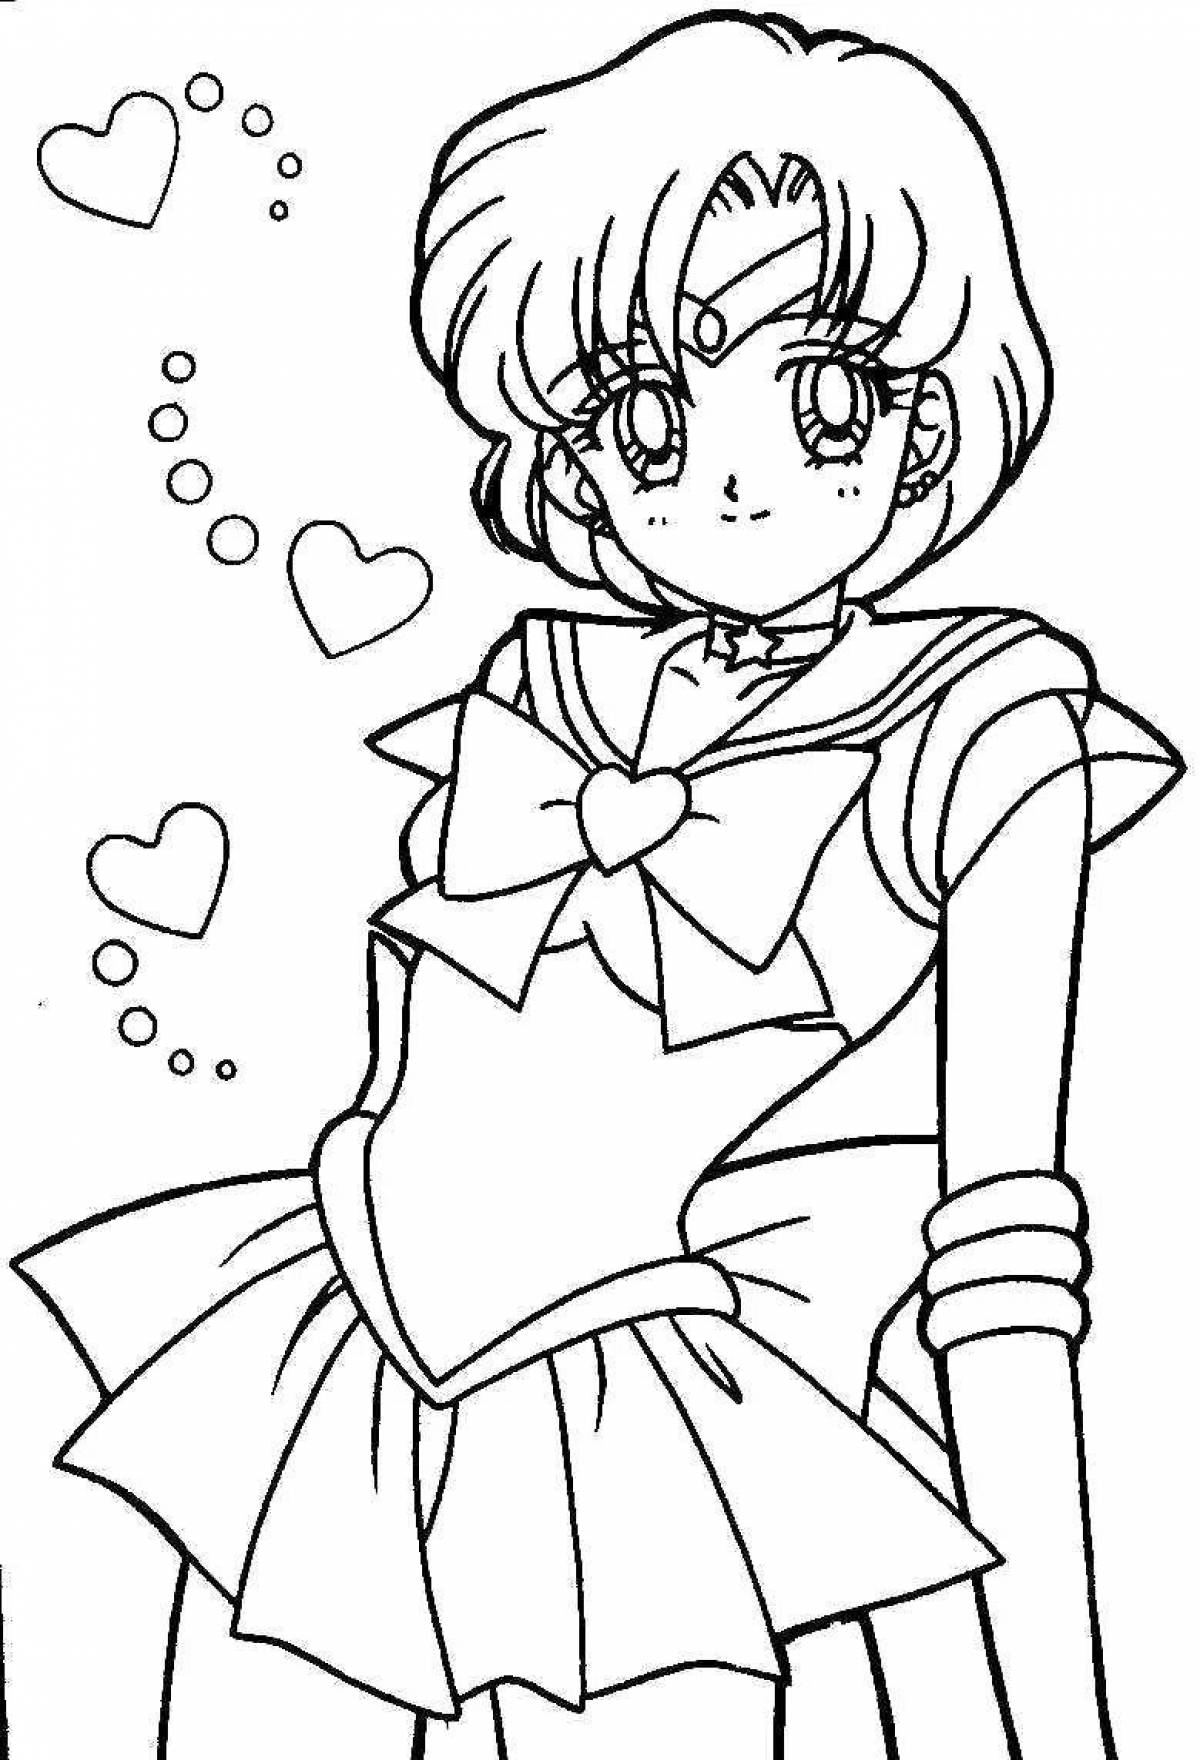 Dreamy coloring book for girls sailor moon